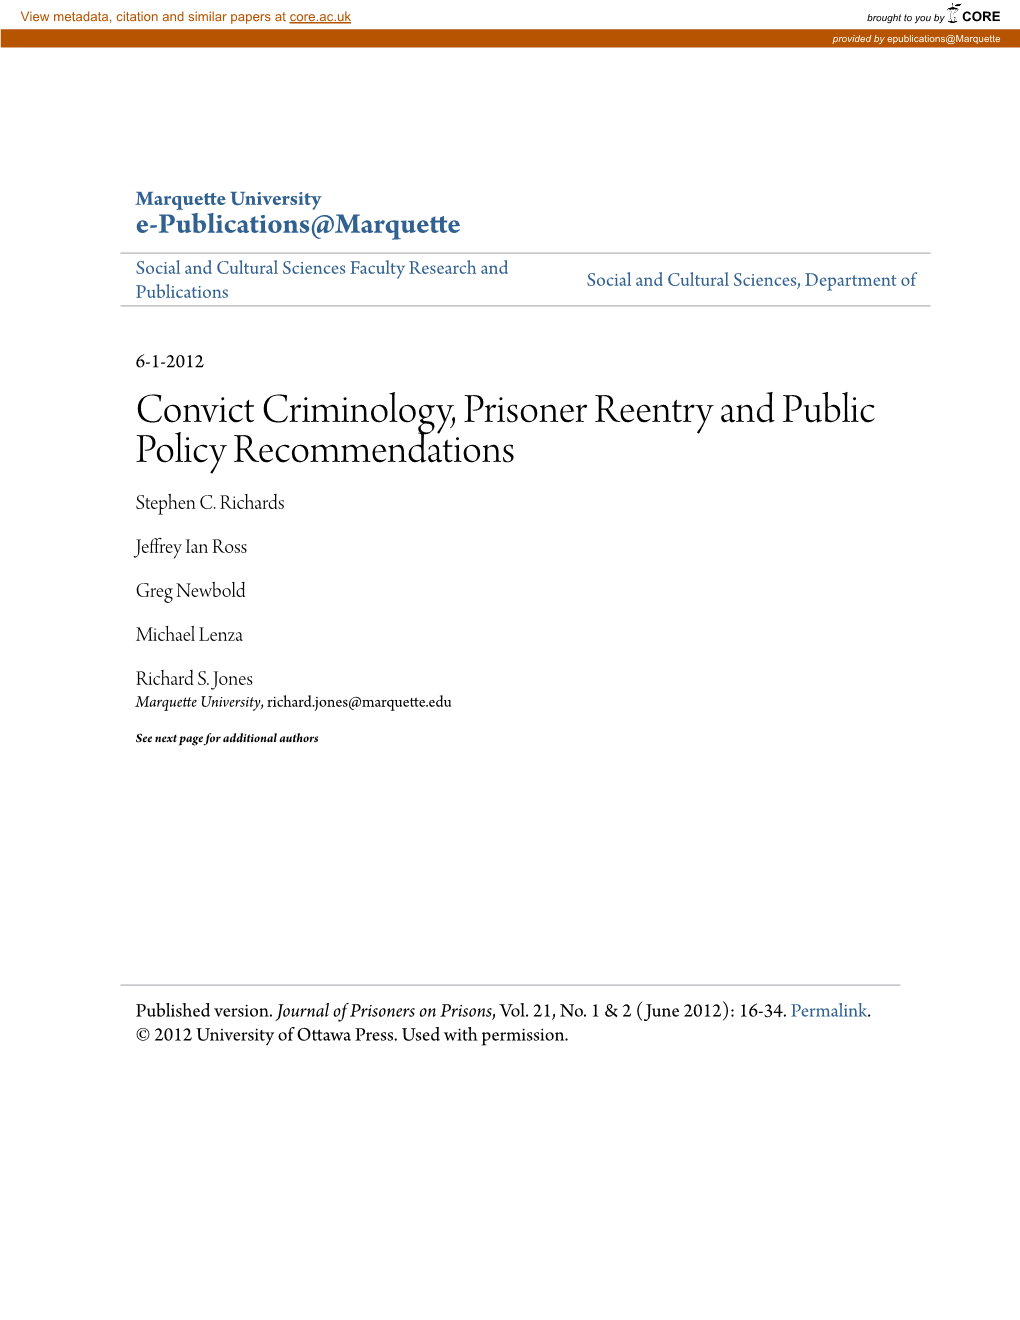 Convict Criminology, Prisoner Reentry and Public Policy Recommendations Stephen C